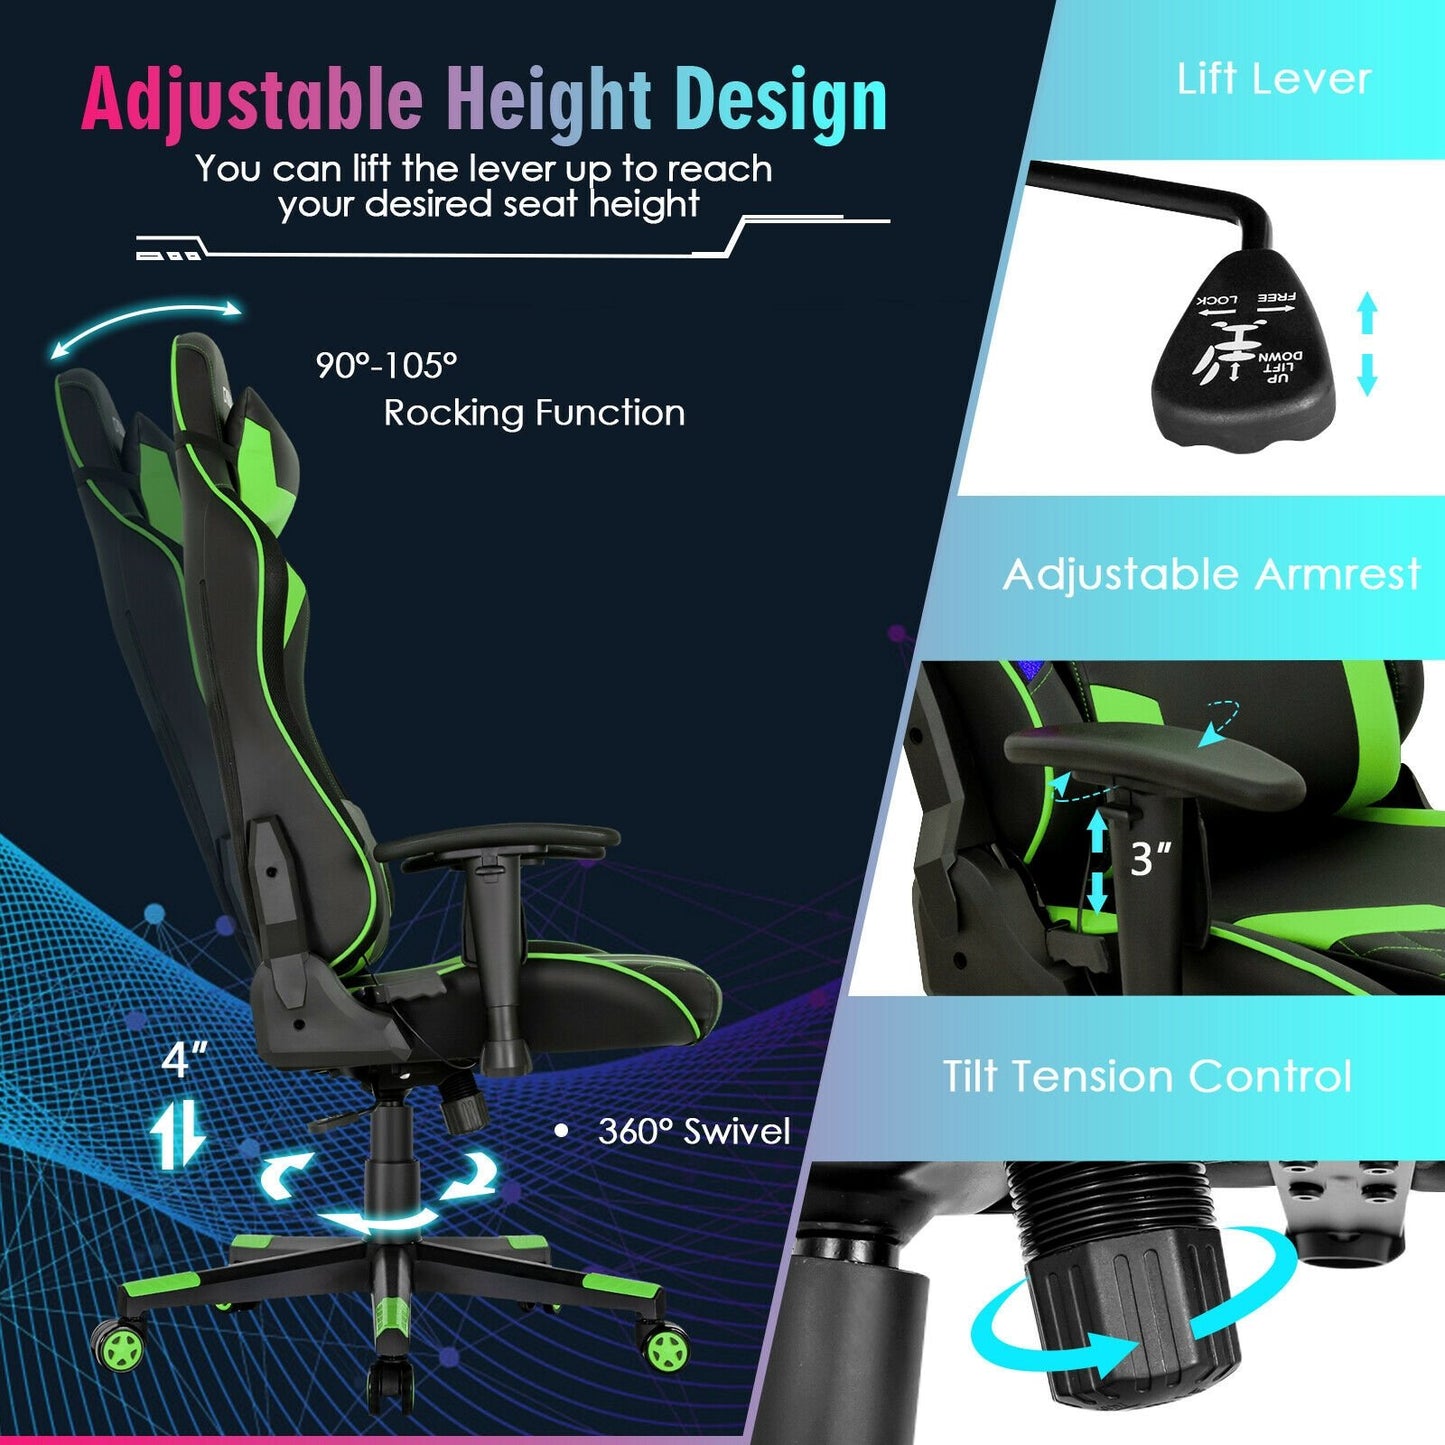 Gaming Chair Adjustable Swivel Computer Chair with Dynamic LED Lights, Green - Gallery Canada